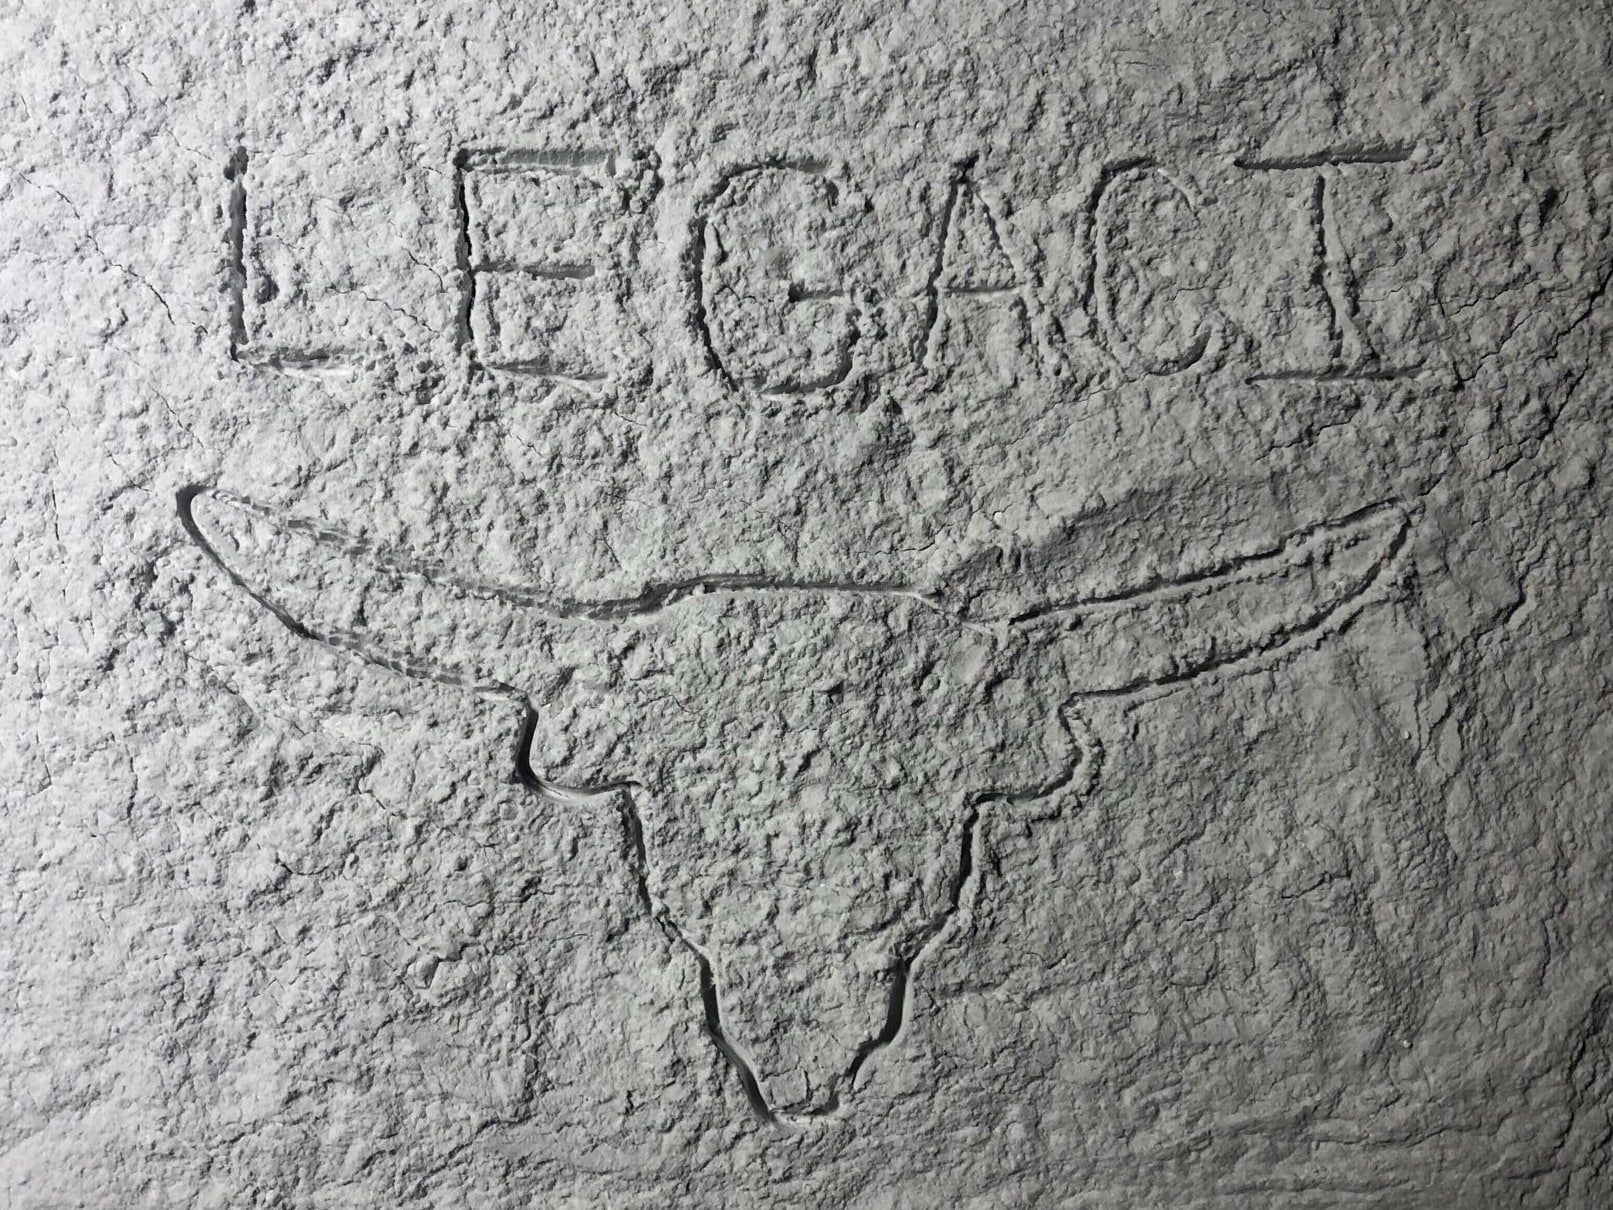 LEGACI text with UT longhorn outline written on the moon's surface